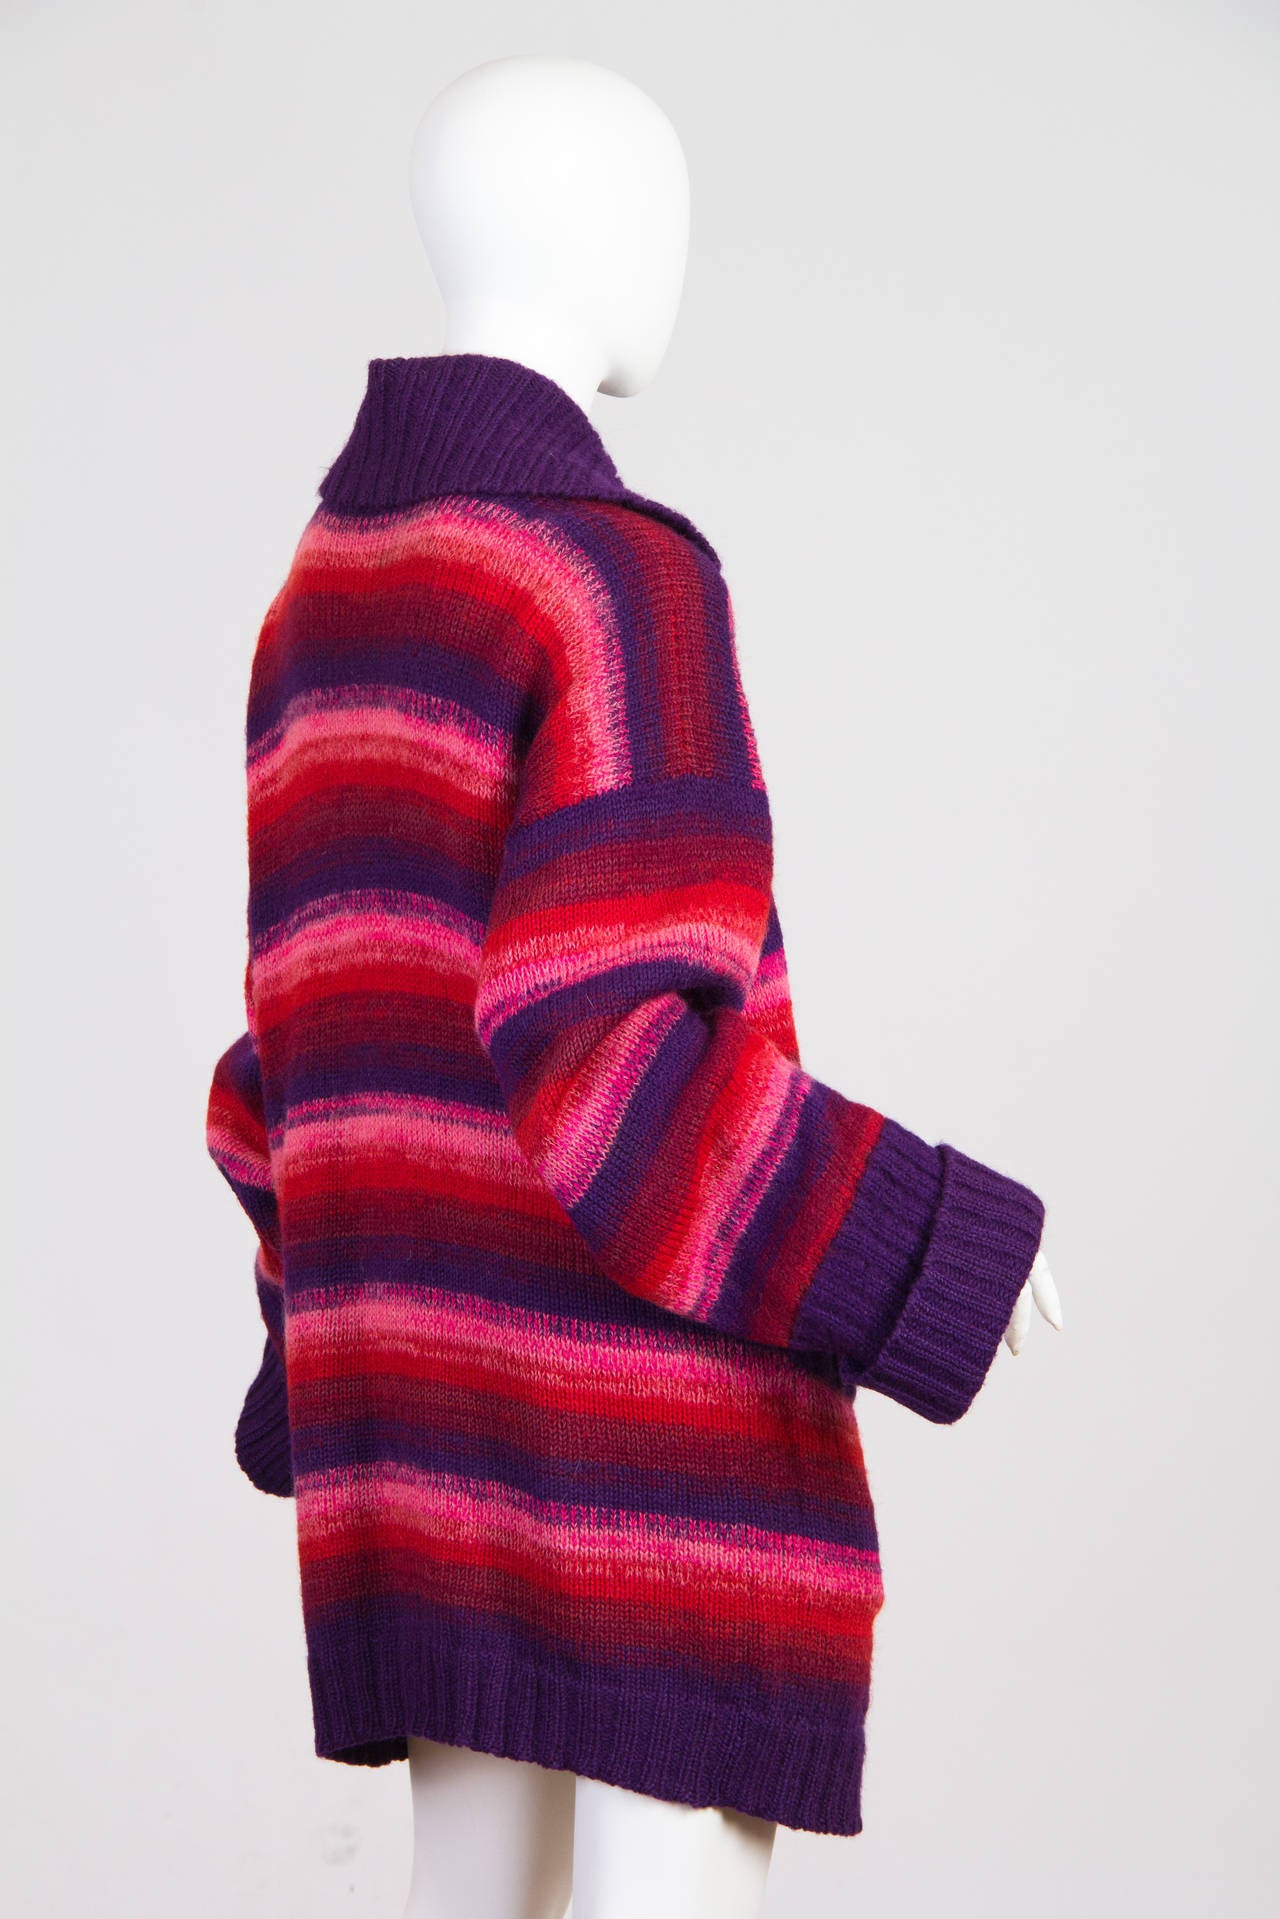 pink and purple striped sweater